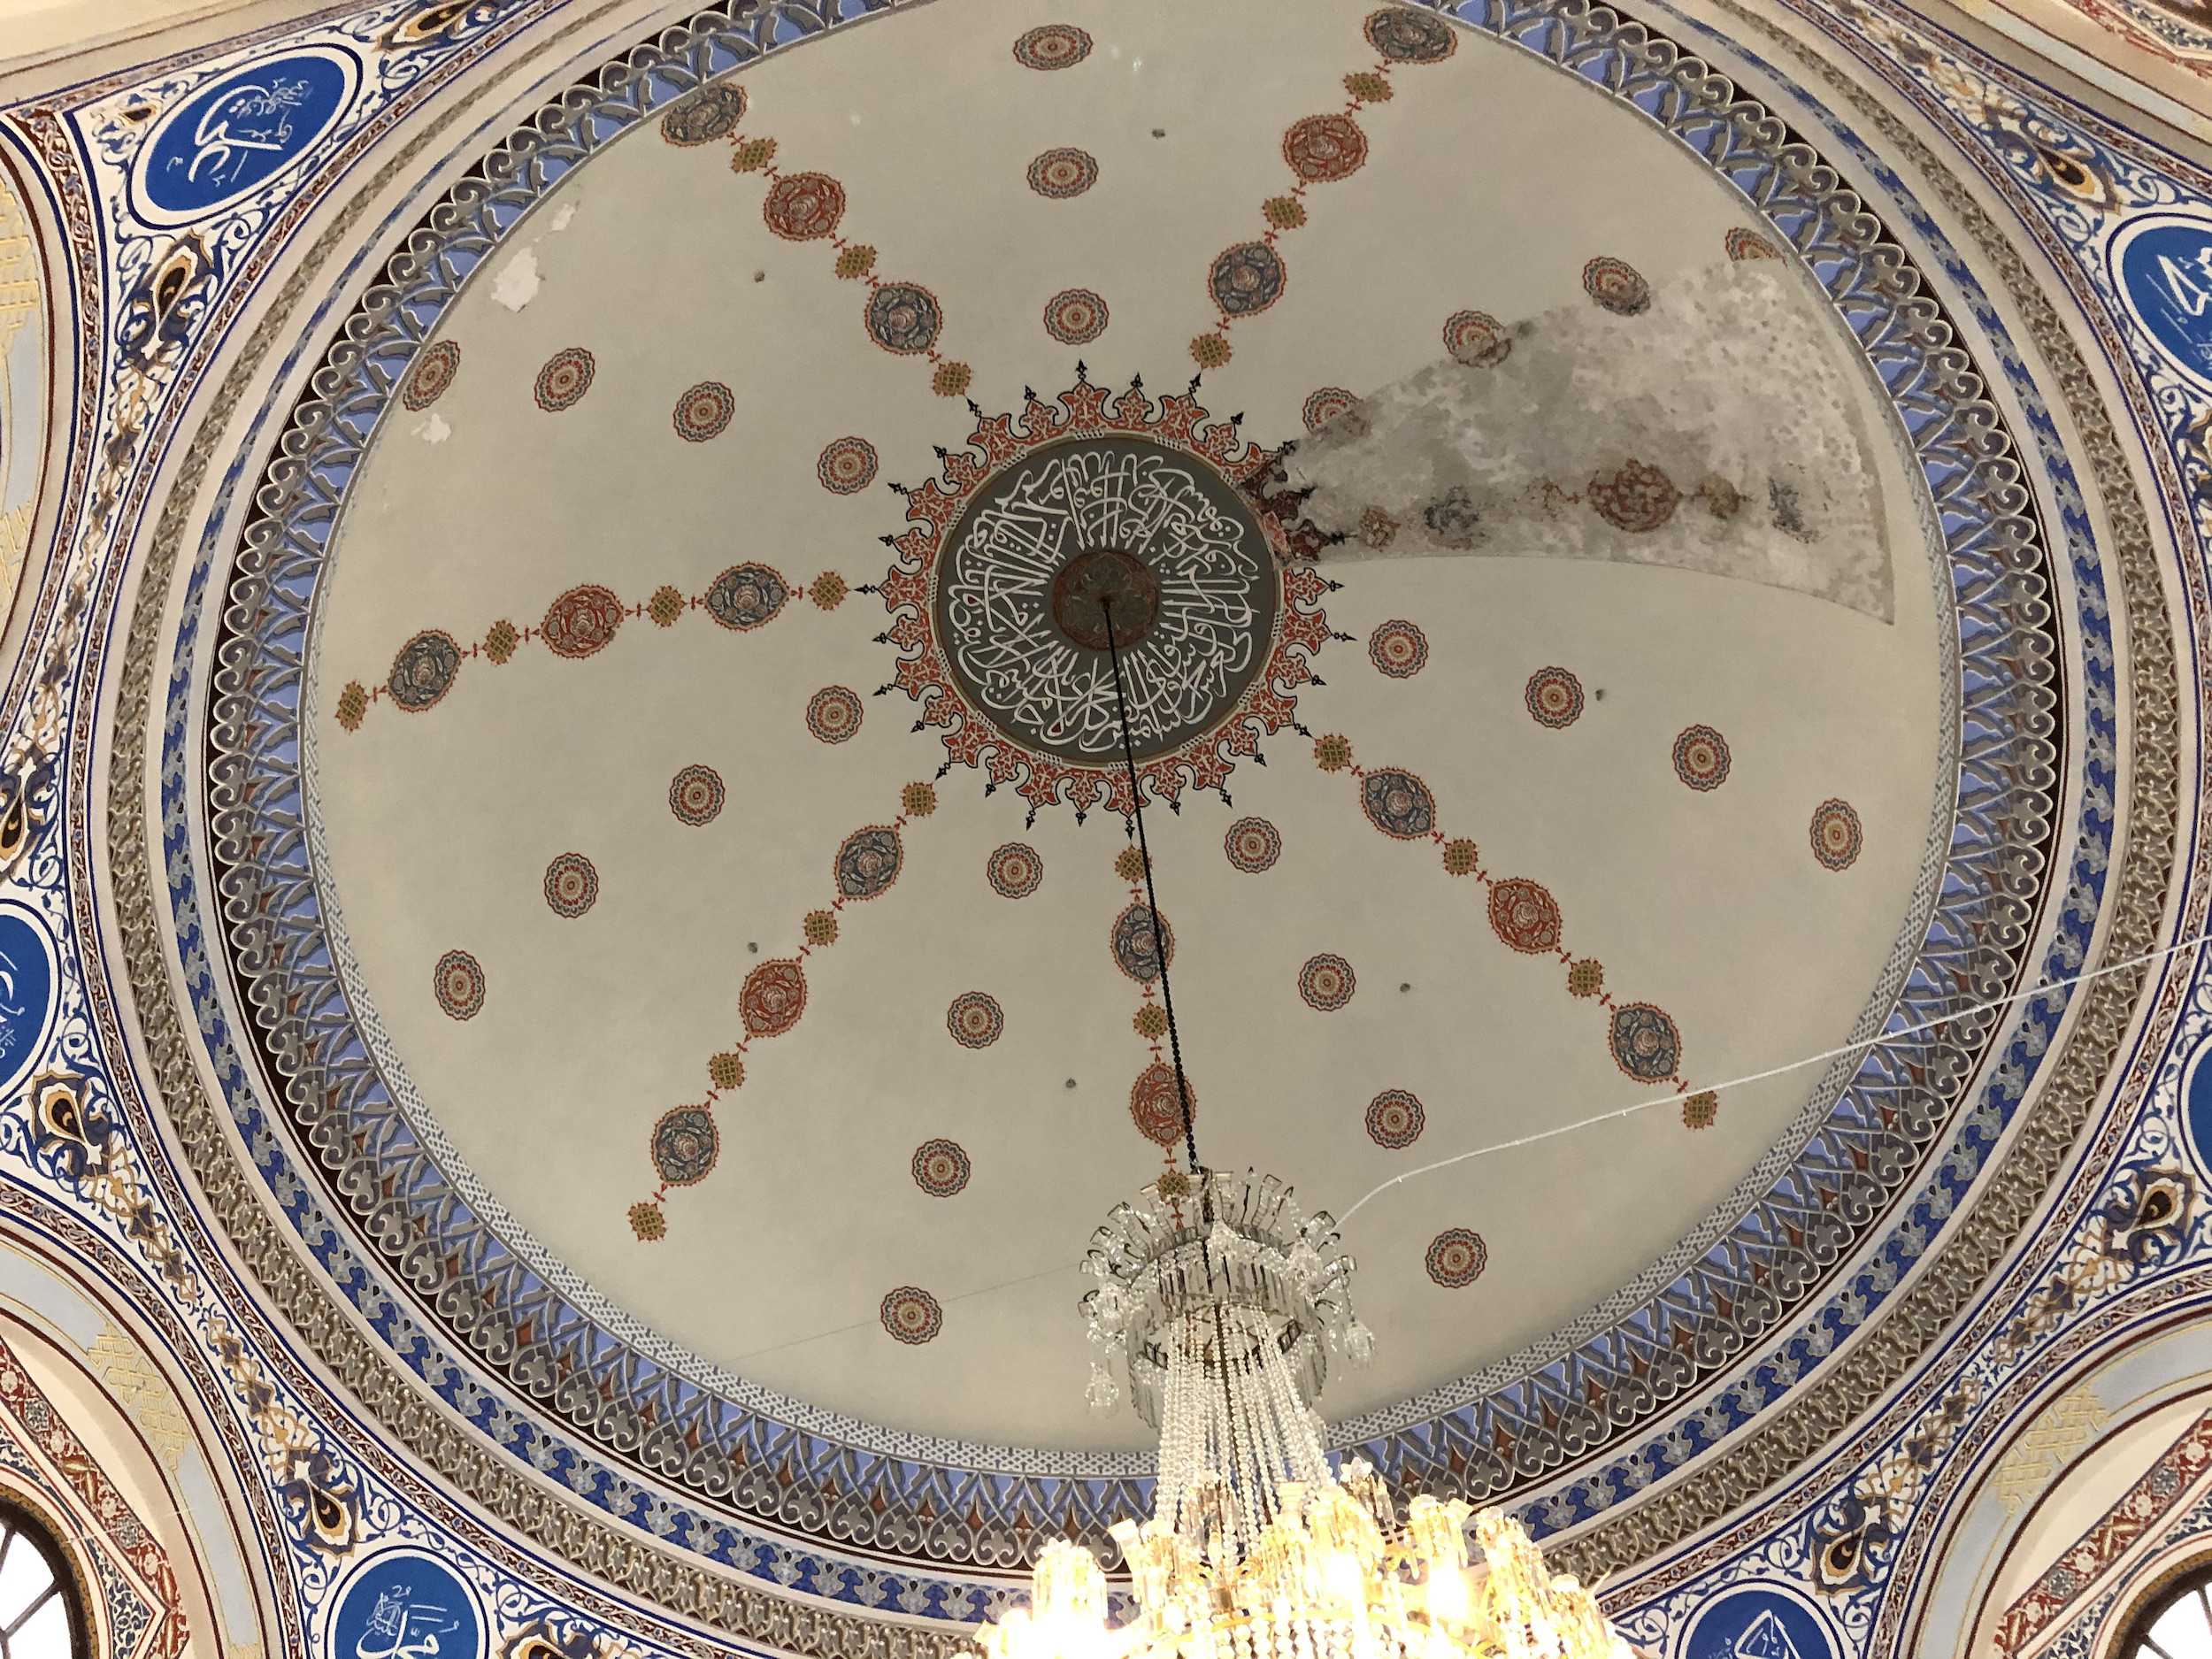 Dome of the tomb of Selim I